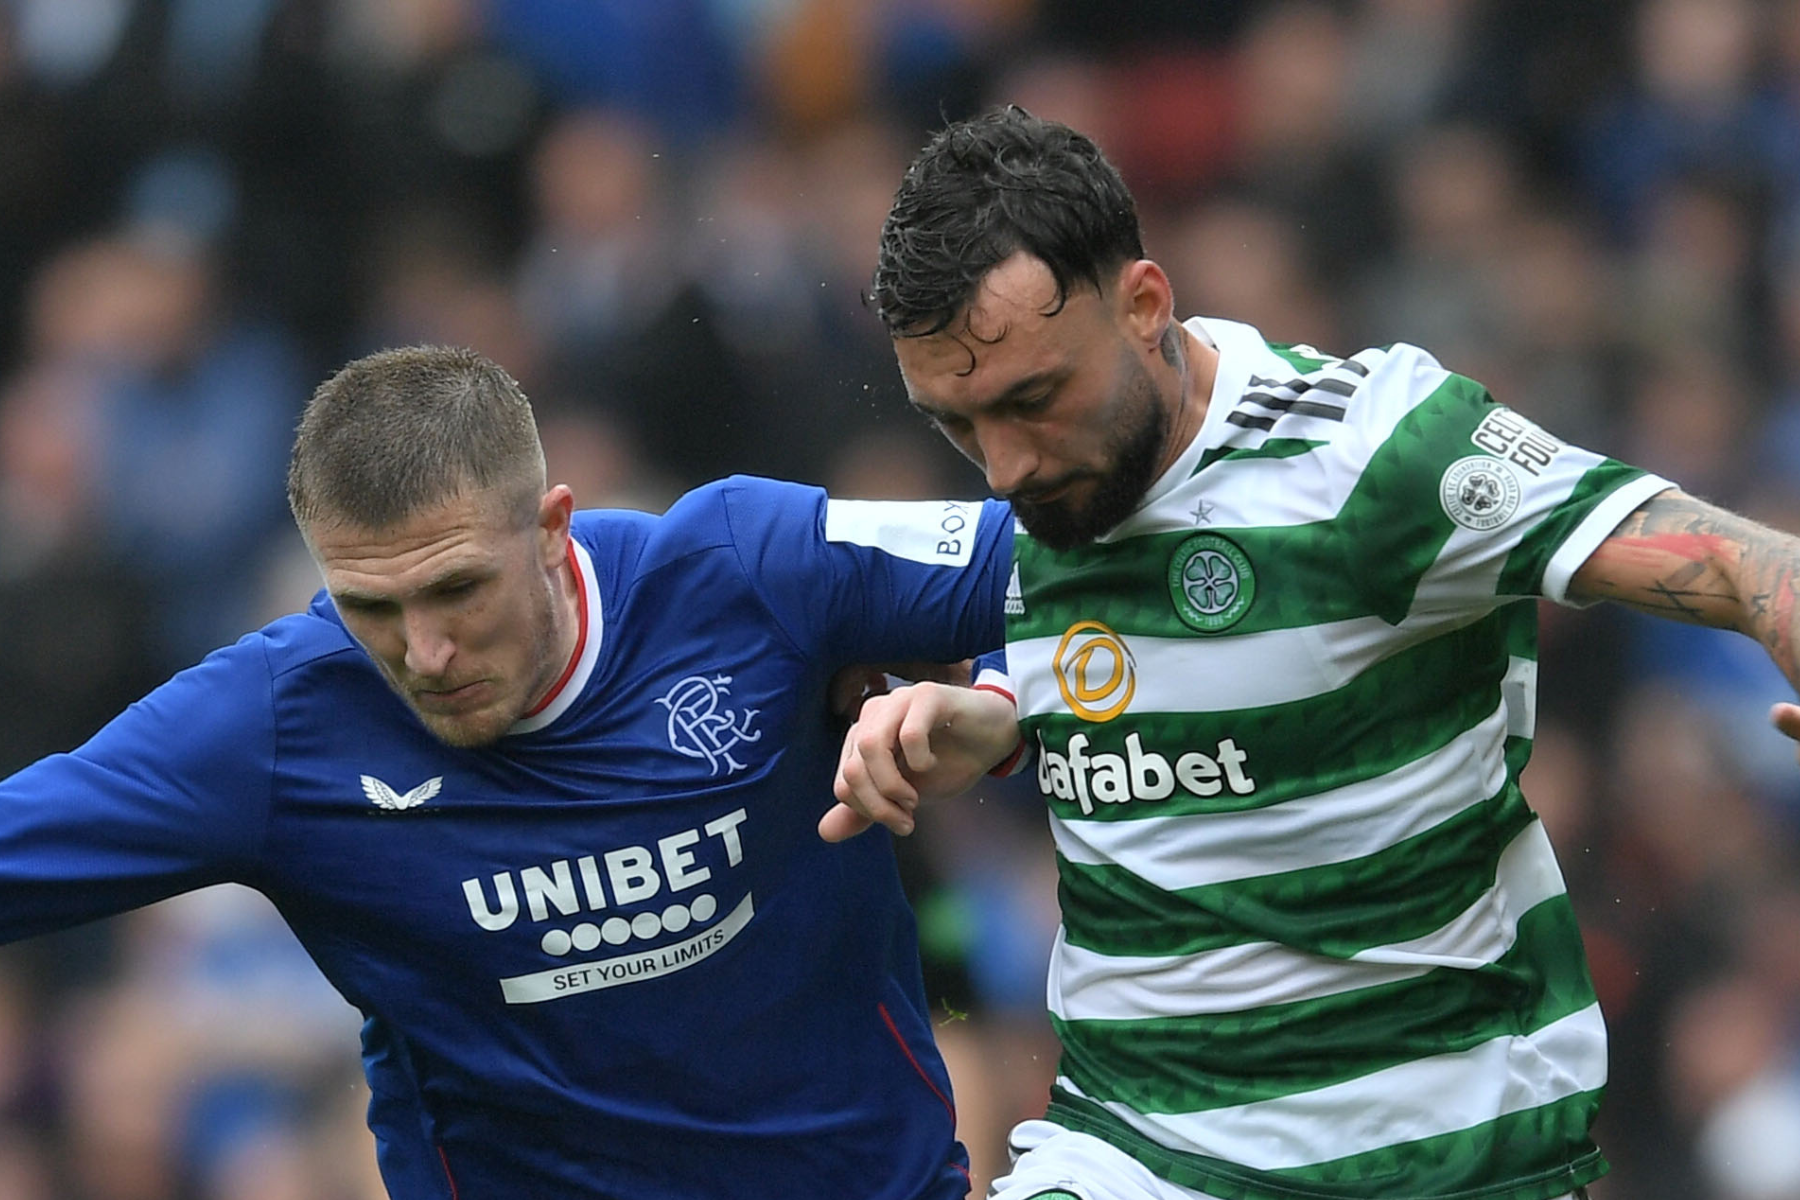 Rangers vs Celtic predictions from Herald & Times writers